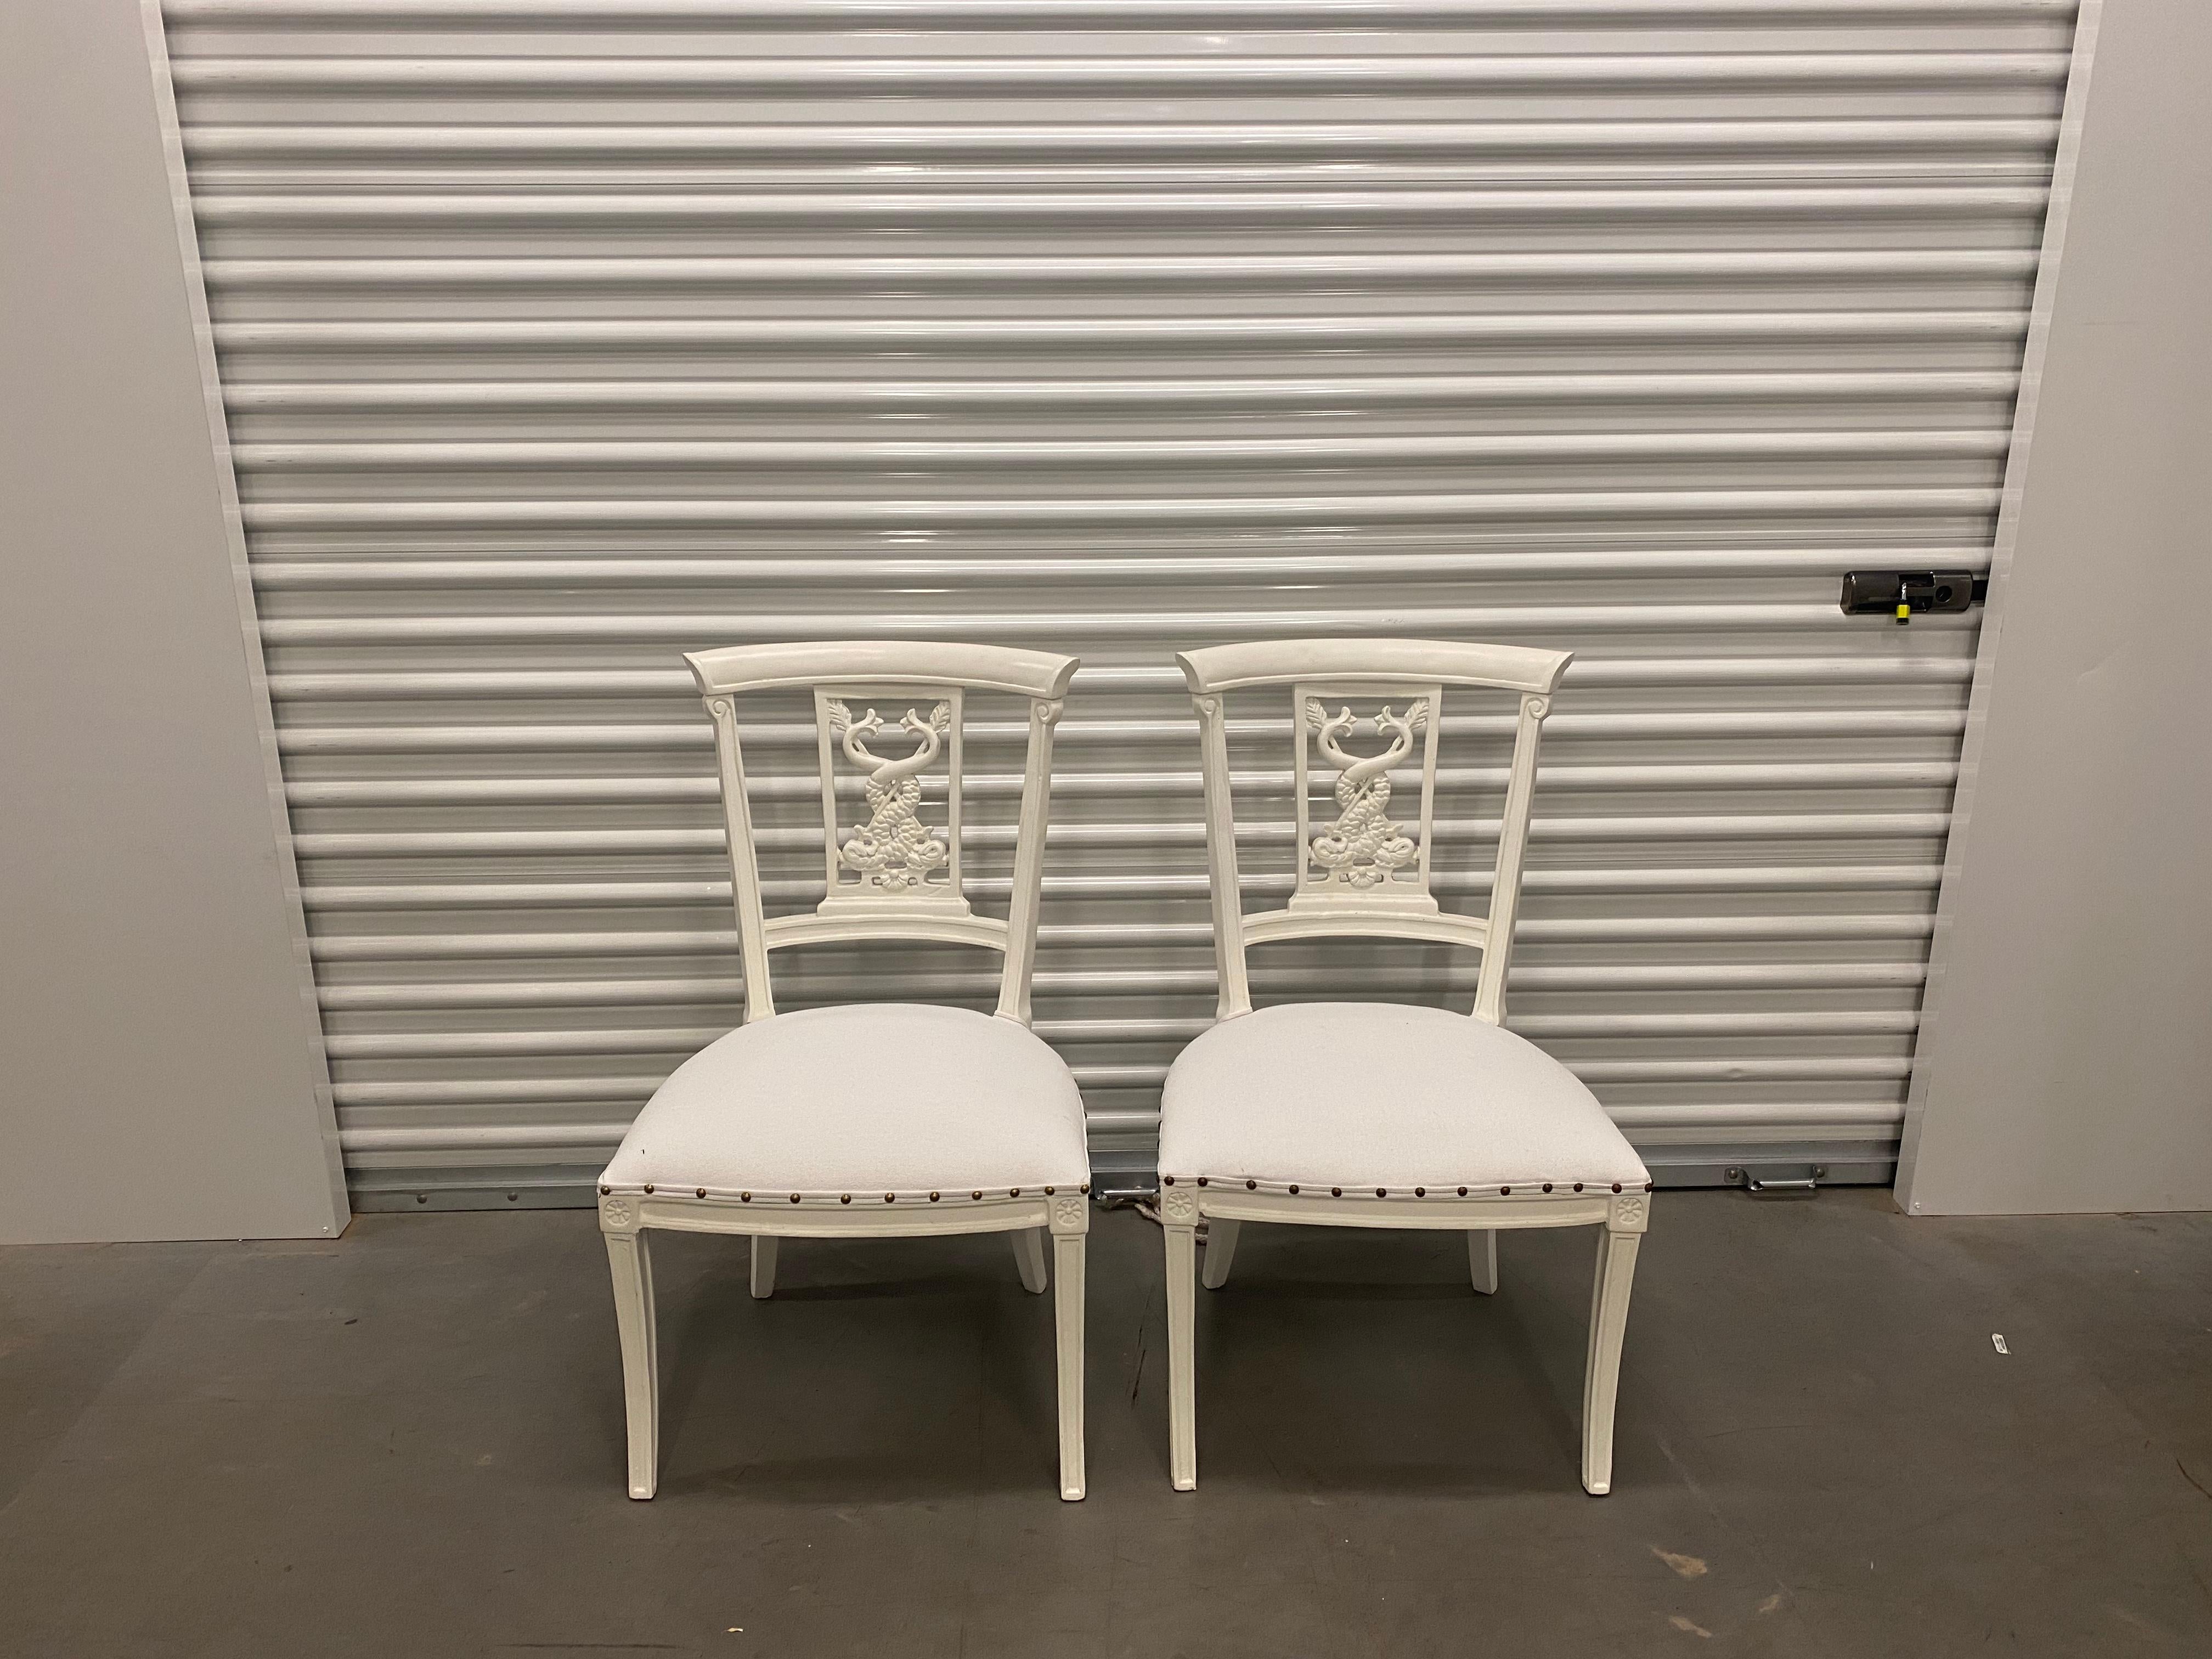 For sale is a fabulous pair of vintage painted side chairs with a wonderful carved dragon design. These are very solid chairs, newly upholstered in a performance fabric with nailhead trim. Pair of chairs came from an antique store in New York City